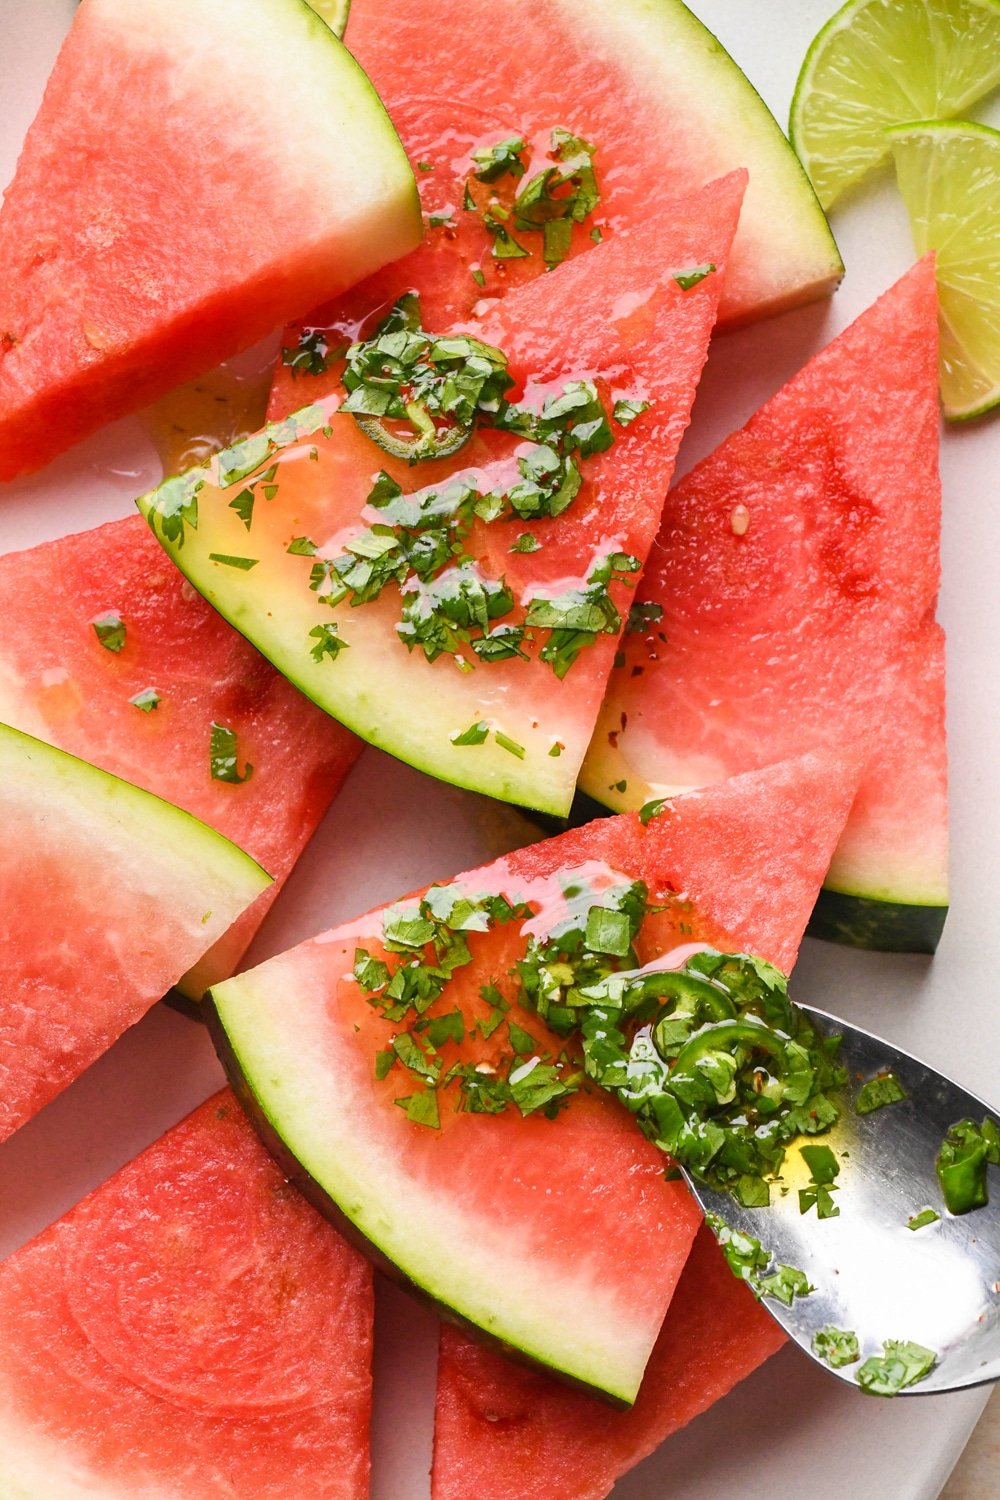 How to make spicy watermelon salad: Spooning the dressing over watermelon wedges on a large serving platter.